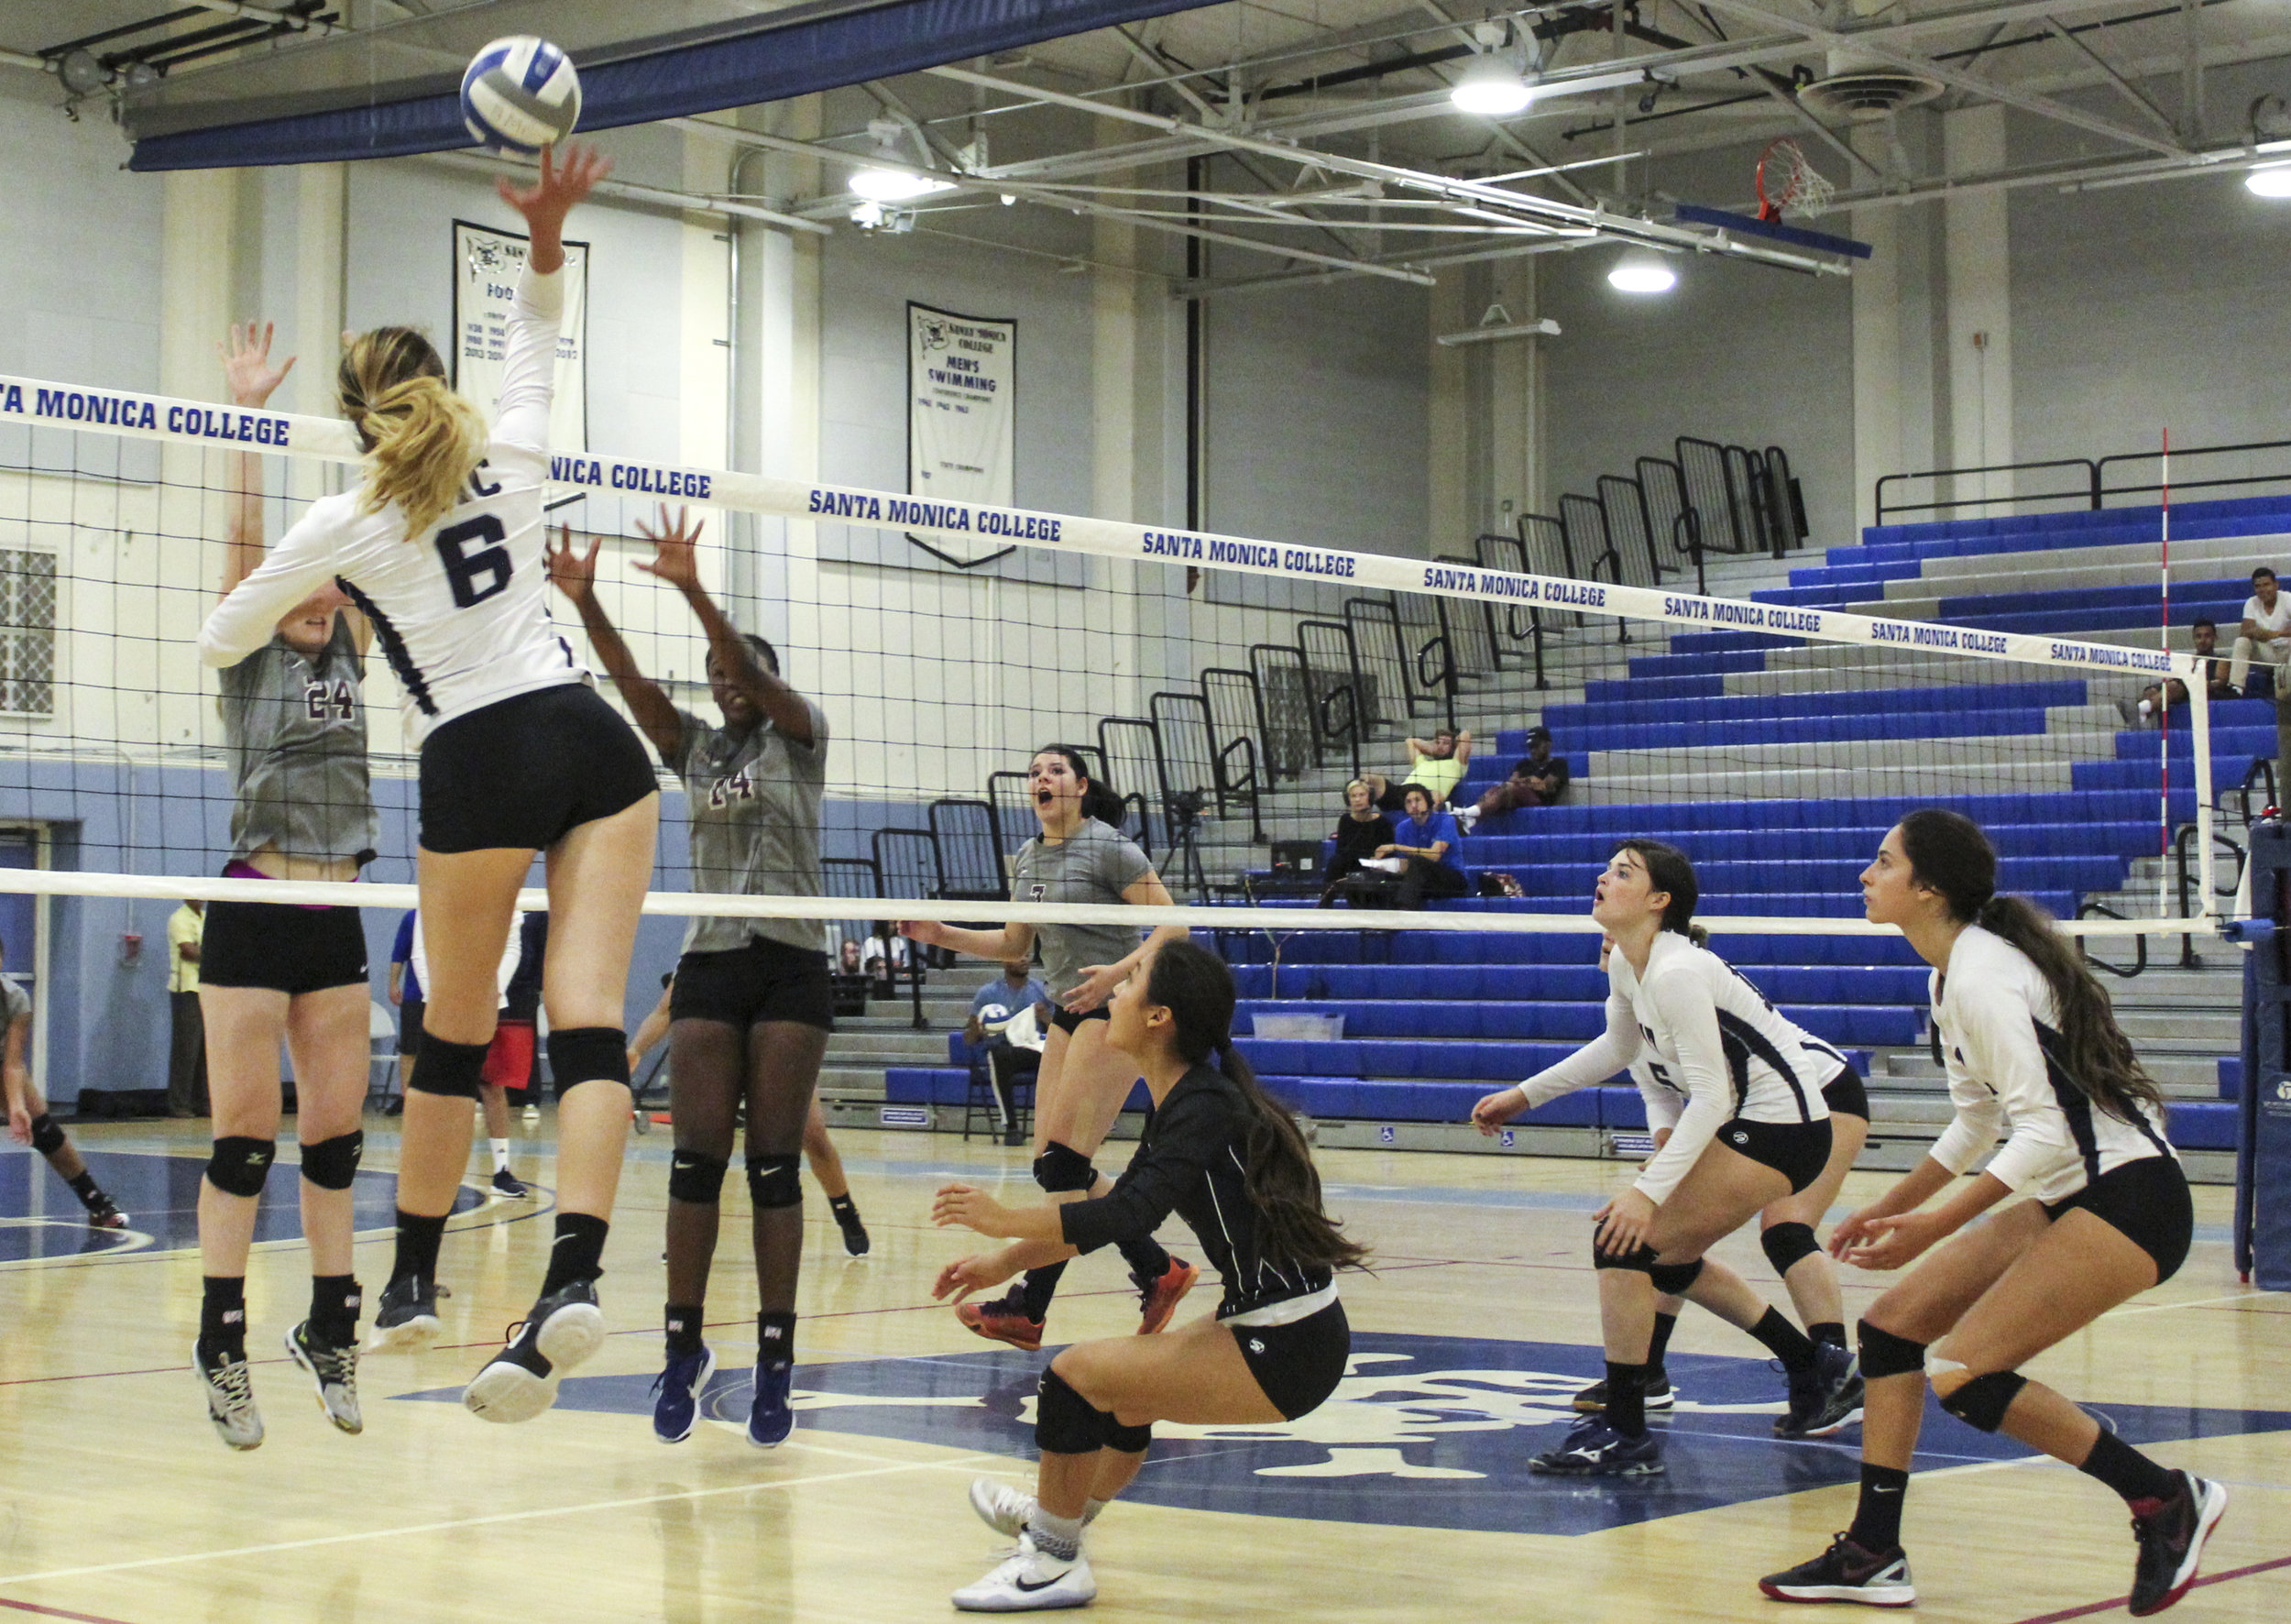  SMC women’s volleyball Outside Hitter (OH) Chelsea Bostwick  (#6, far left, blue and white) goes up for the kill against a Marauder defense that repeatedly had little counter against the “bombs away” style of the Corsair attack during the match at  